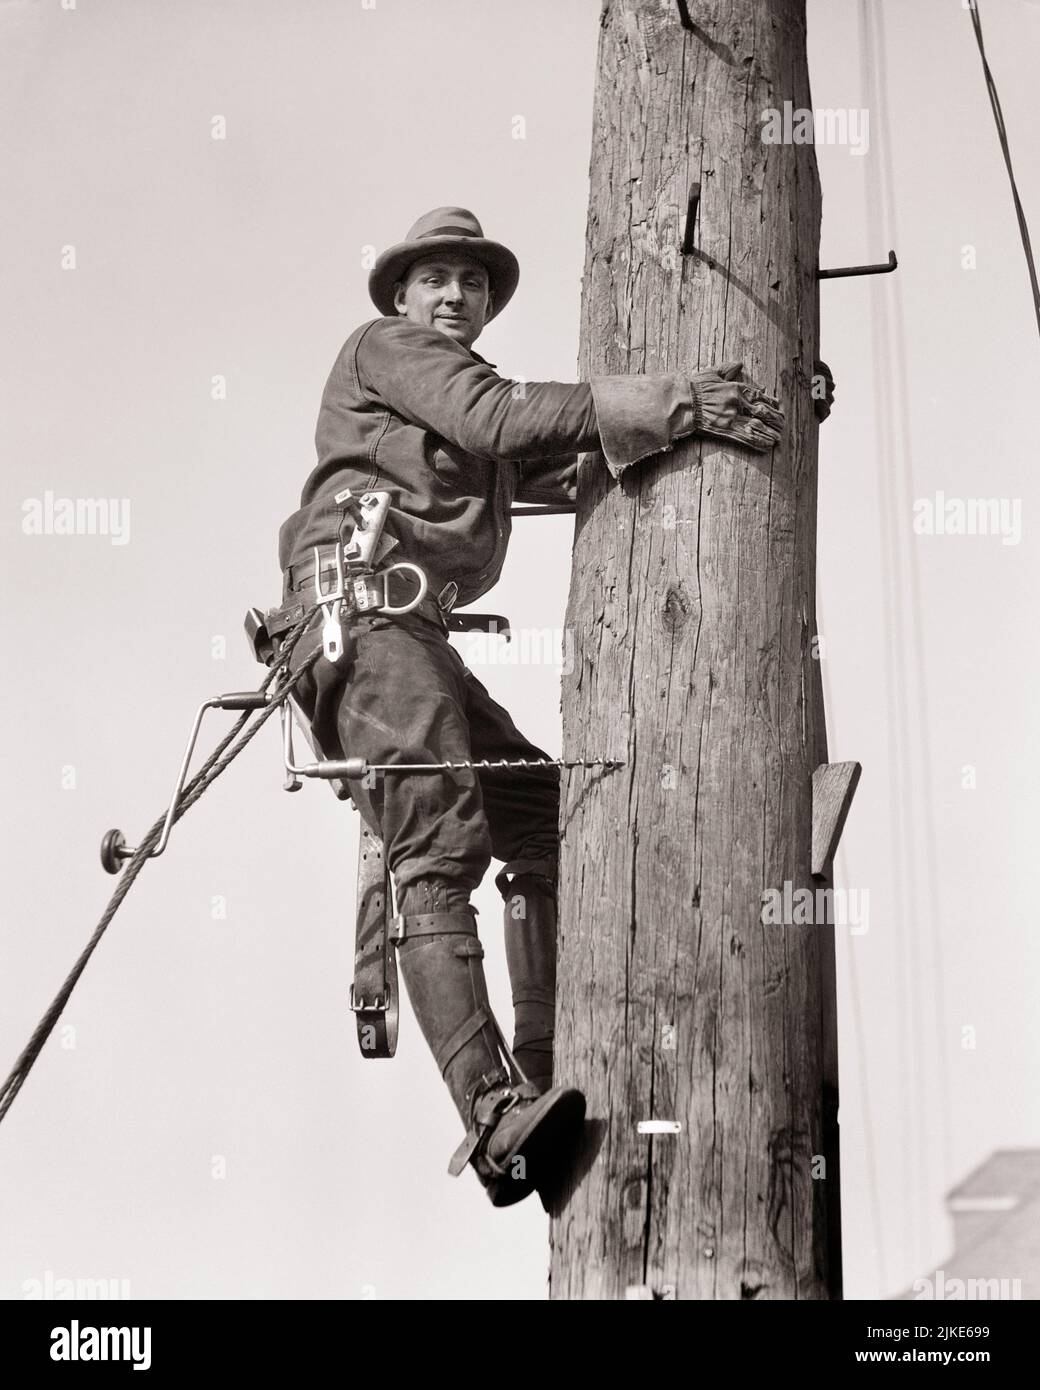 1930s ONE MAN WORKING ON UTILITY POLE SMILING LOOKING AT CAMERA - i606 HAR001 HARS OCCUPATION STRUCTURE SKILLS CHEERFUL BUILD BASE CAREERS LOW ANGLE RECOVERY LABOR BETTER EMPLOYMENT OCCUPATIONS SMILES JOYFUL INFRASTRUCTURE EMPLOYEE FACILITIES CORE SYSTEMS YOUNG ADULT MAN BLACK AND WHITE CAUCASIAN ETHNICITY ECONOMY HAR001 LABORING OLD FASHIONED Stock Photo